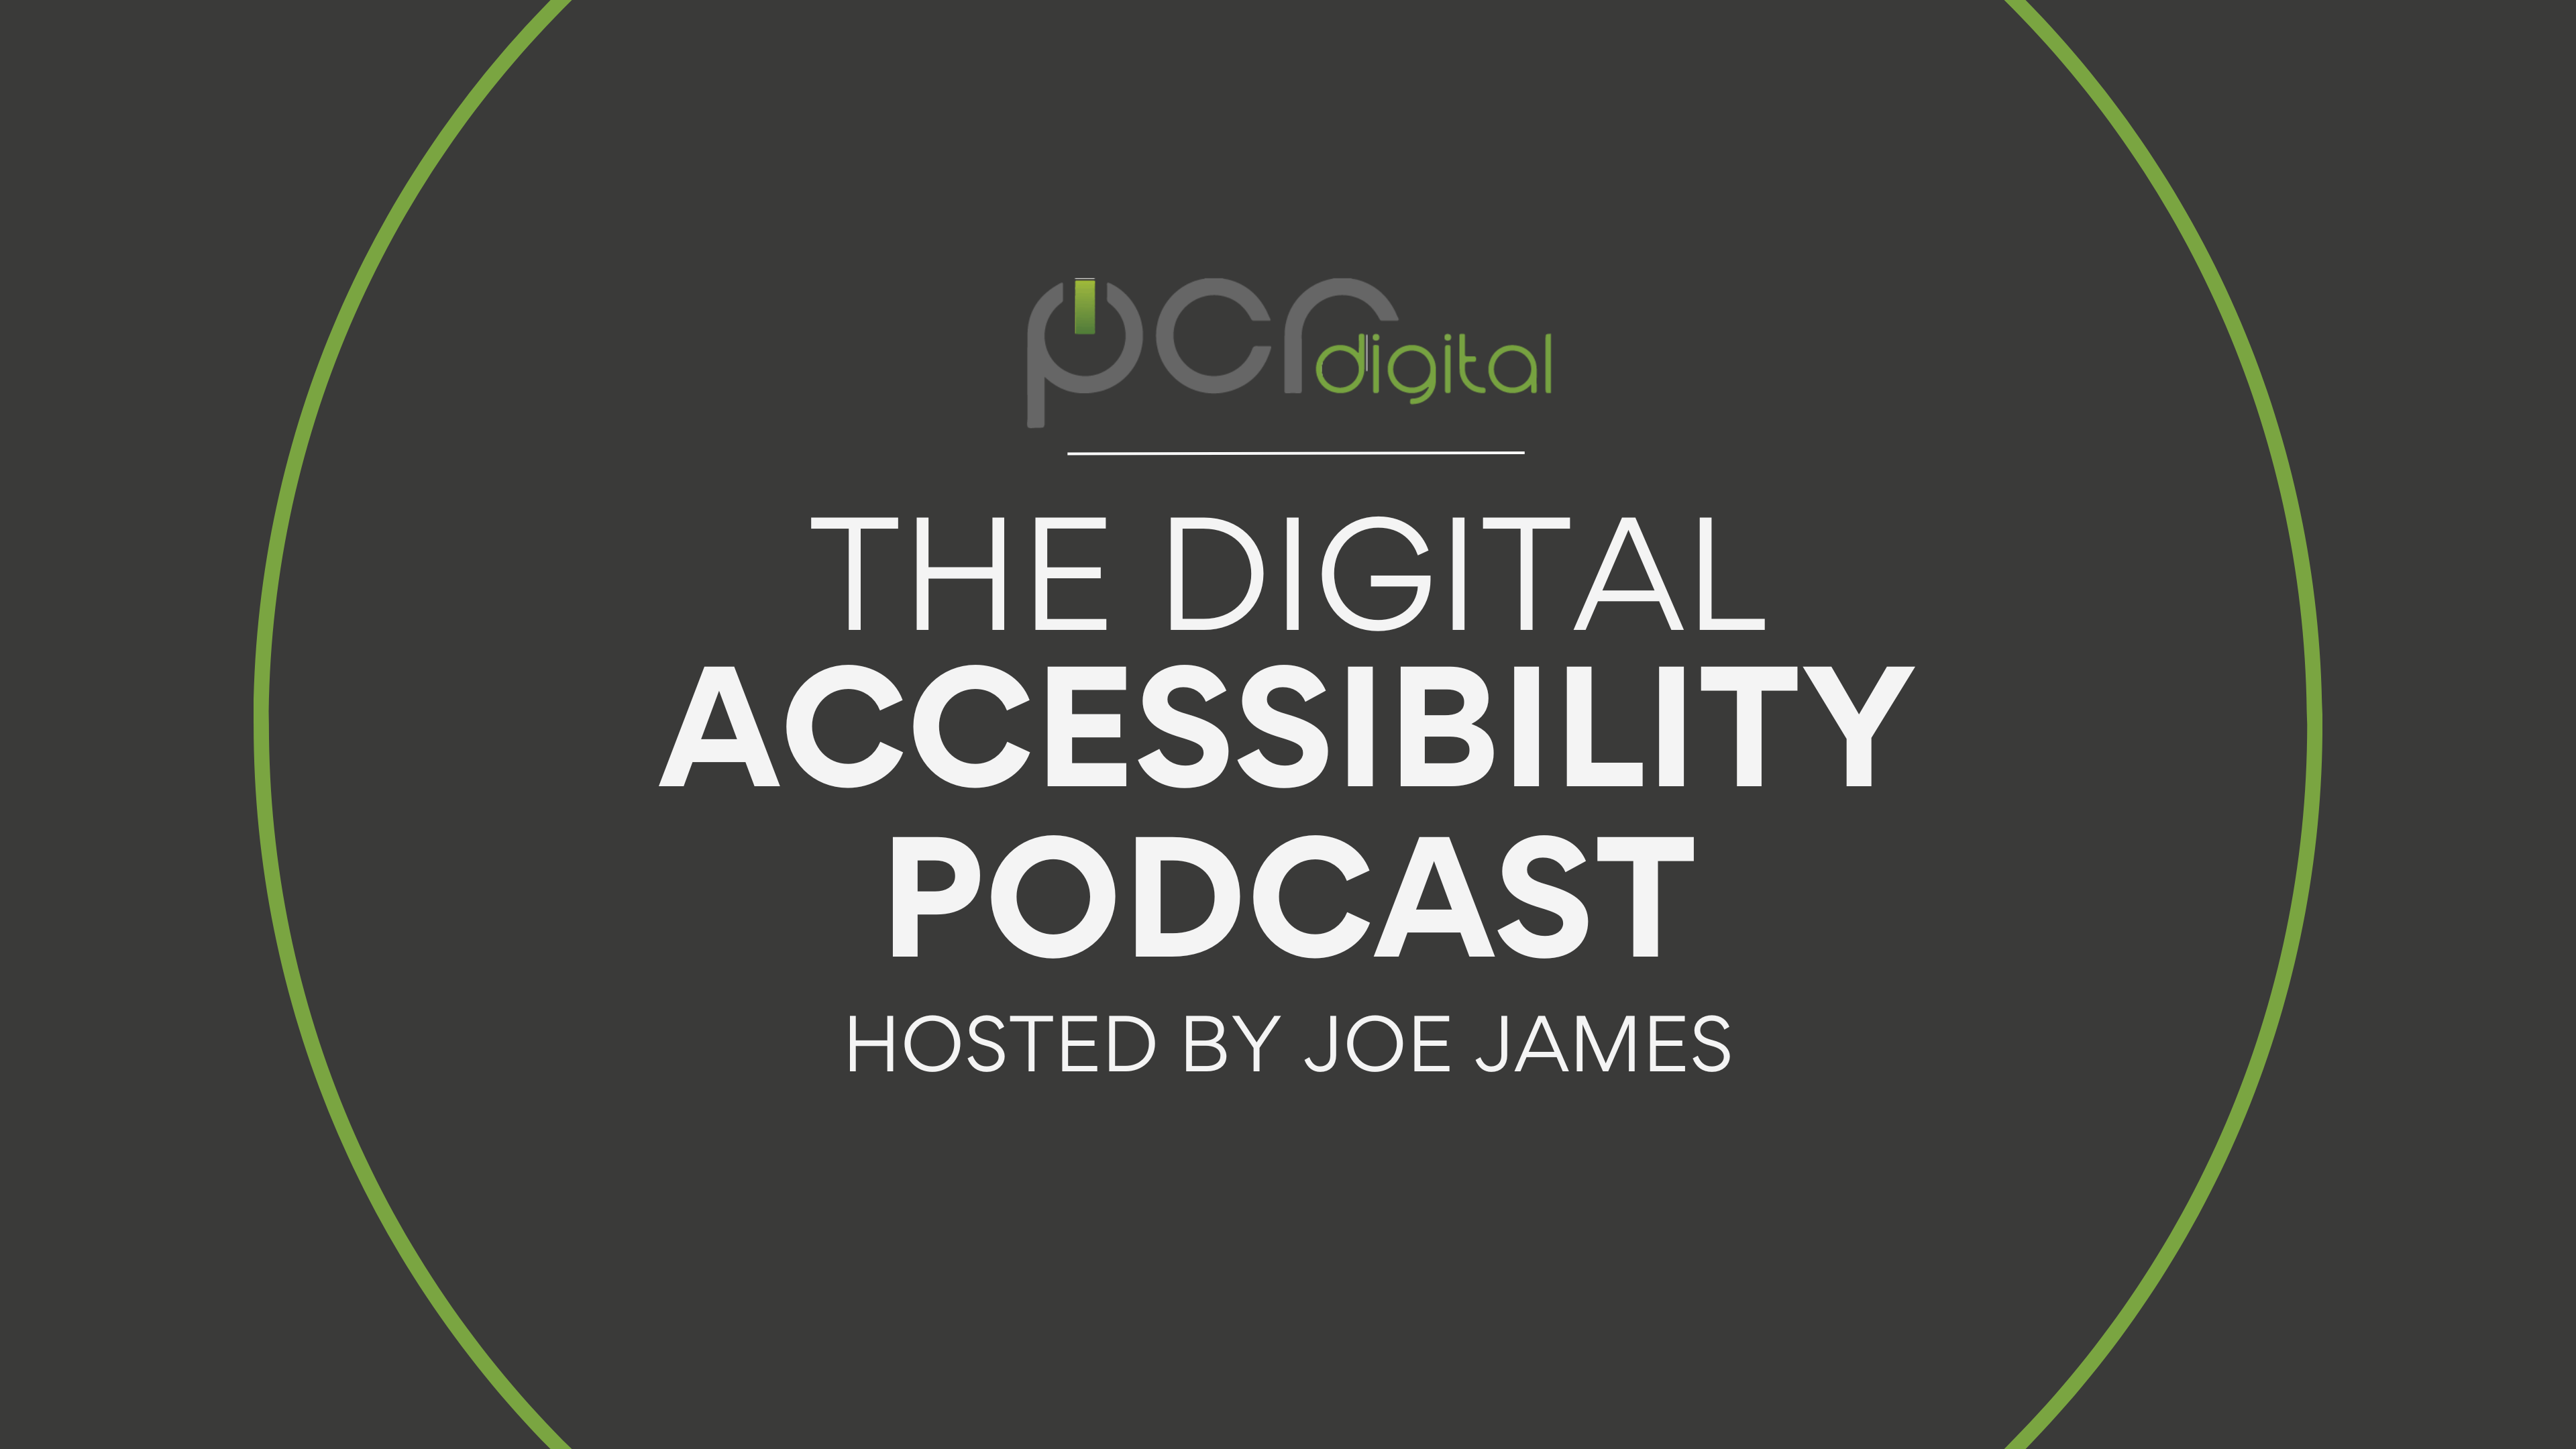 The Digital Accessibility Podcast Hosted by Joe James